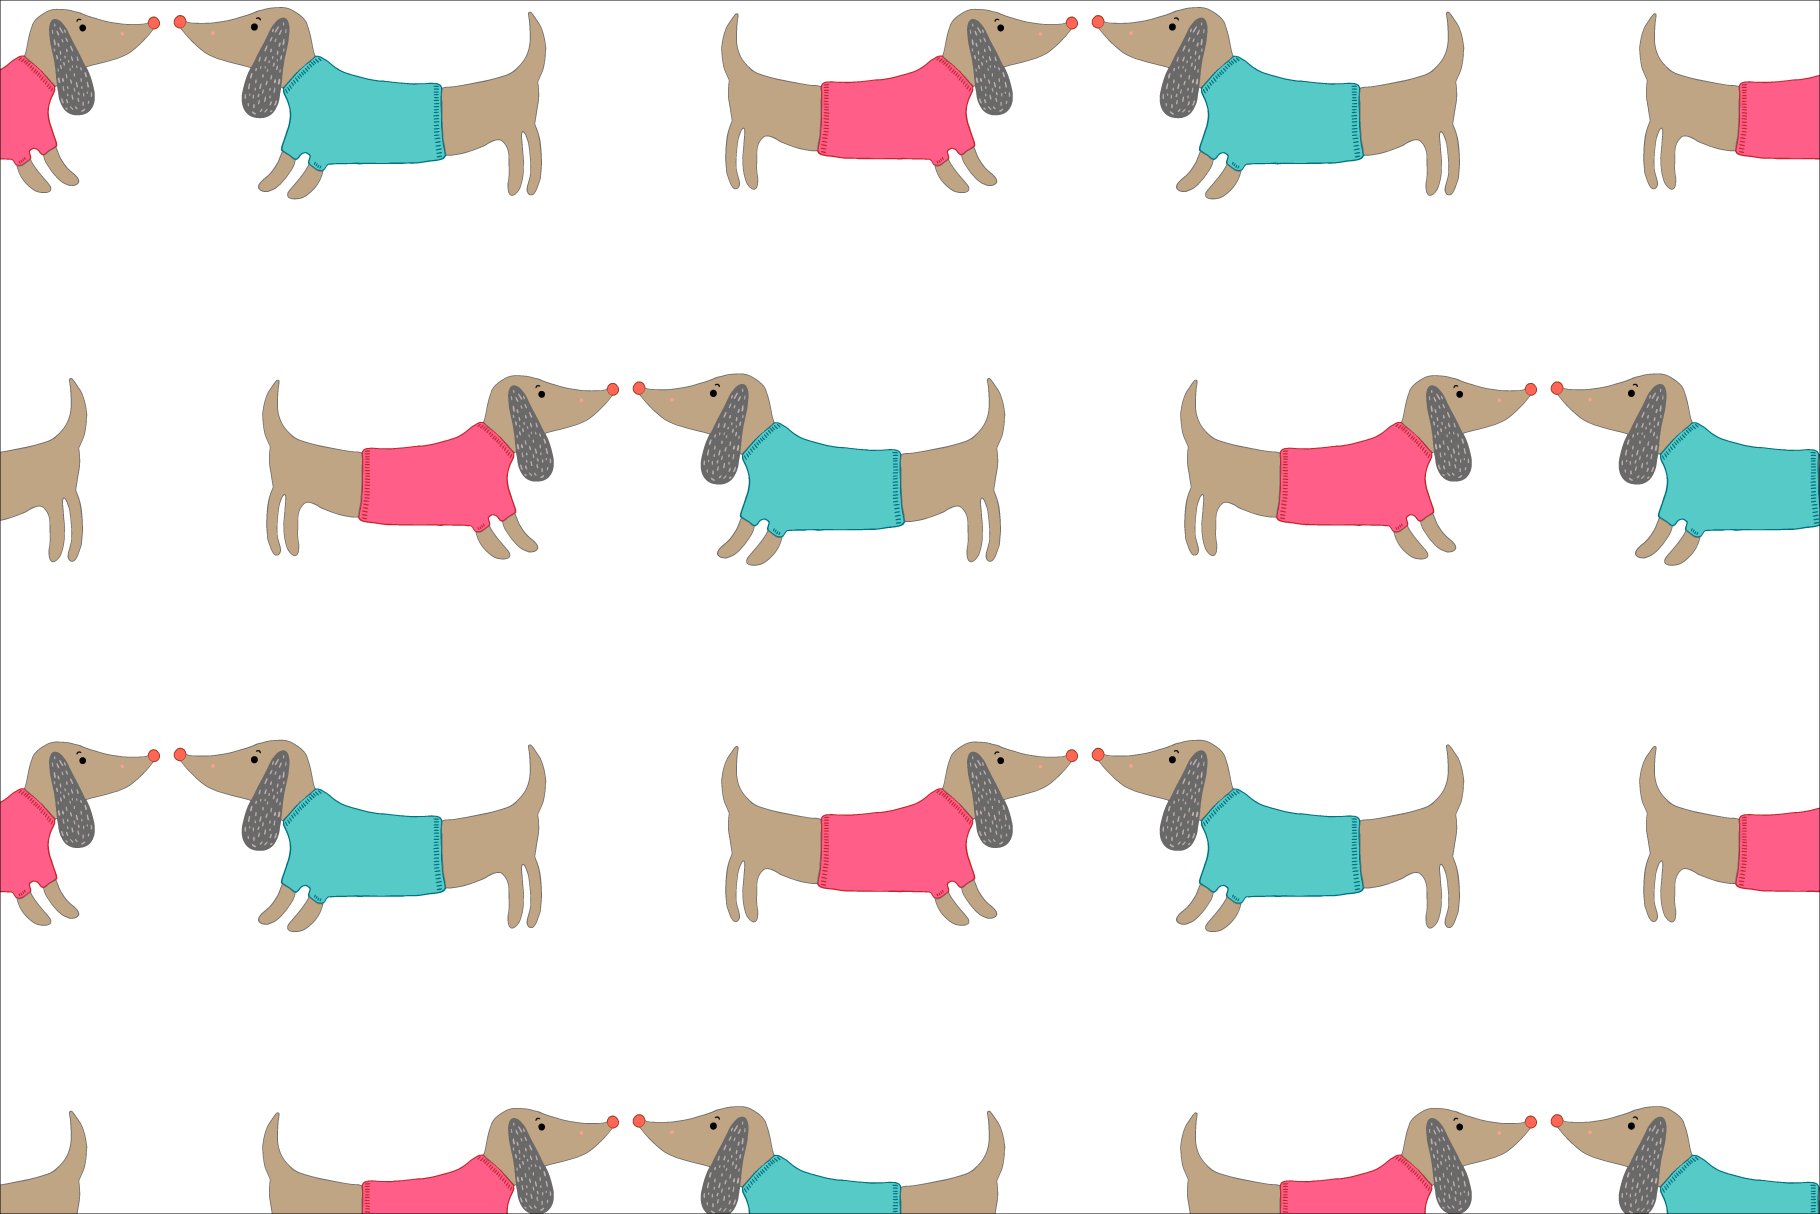 Dachshund Patterns and Illustrations.